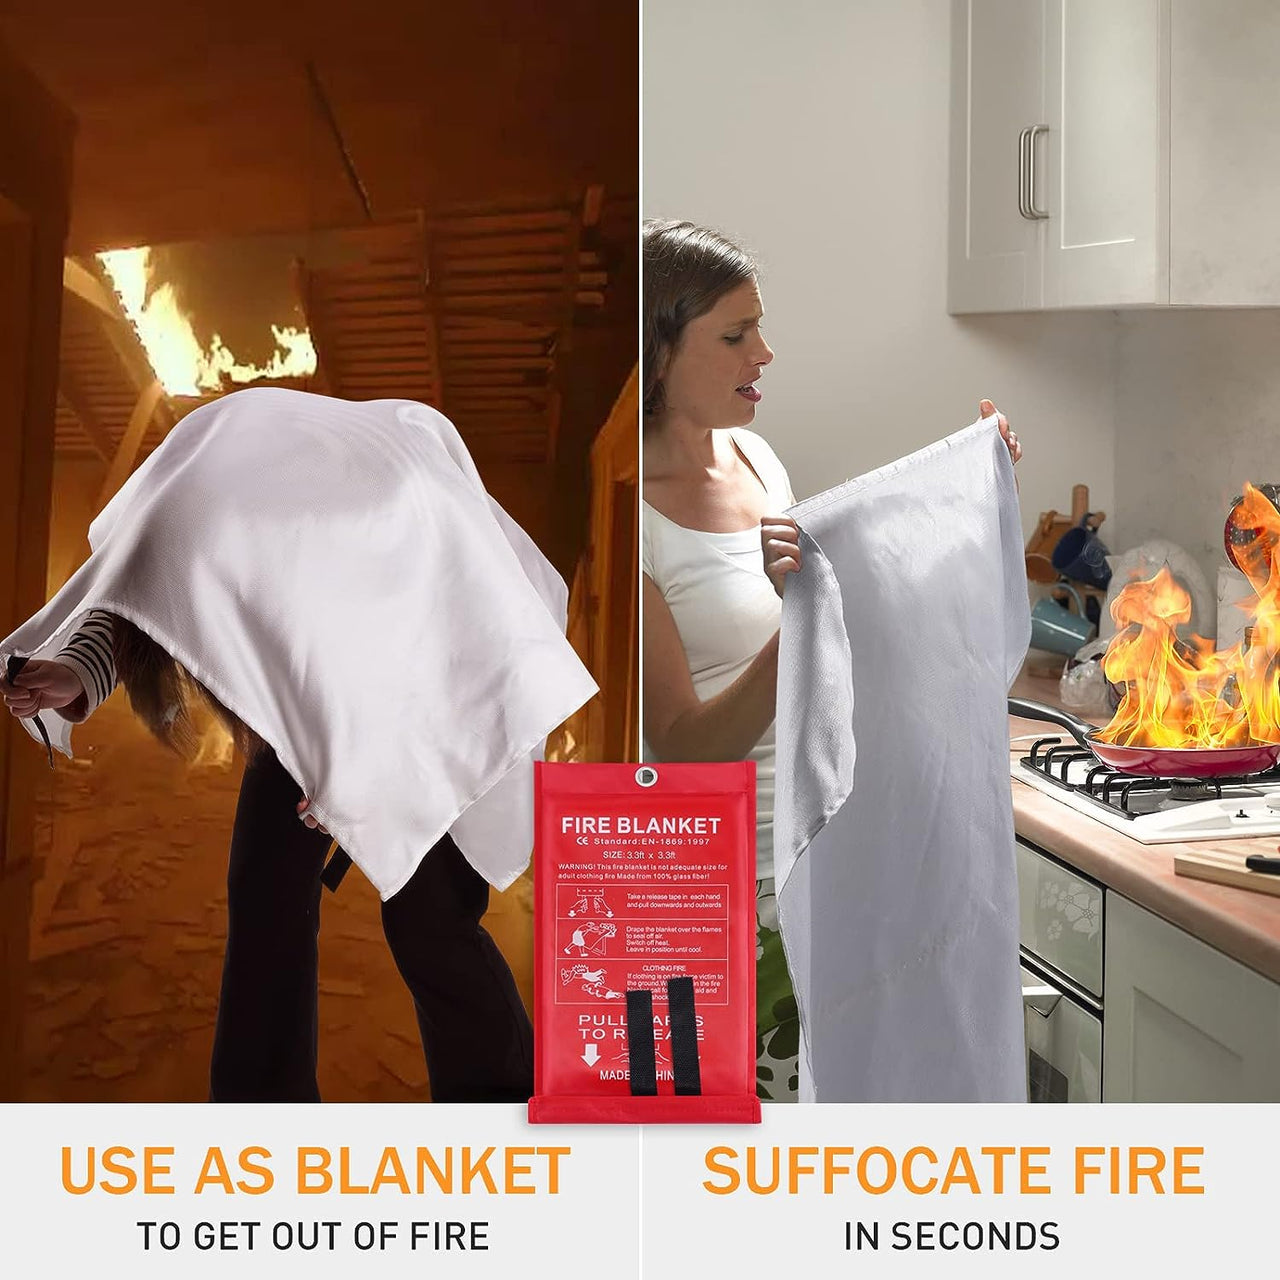 🔥LAST DAY SPECIAL SALE 27% OFF 🔥Emergency Fire Blanket